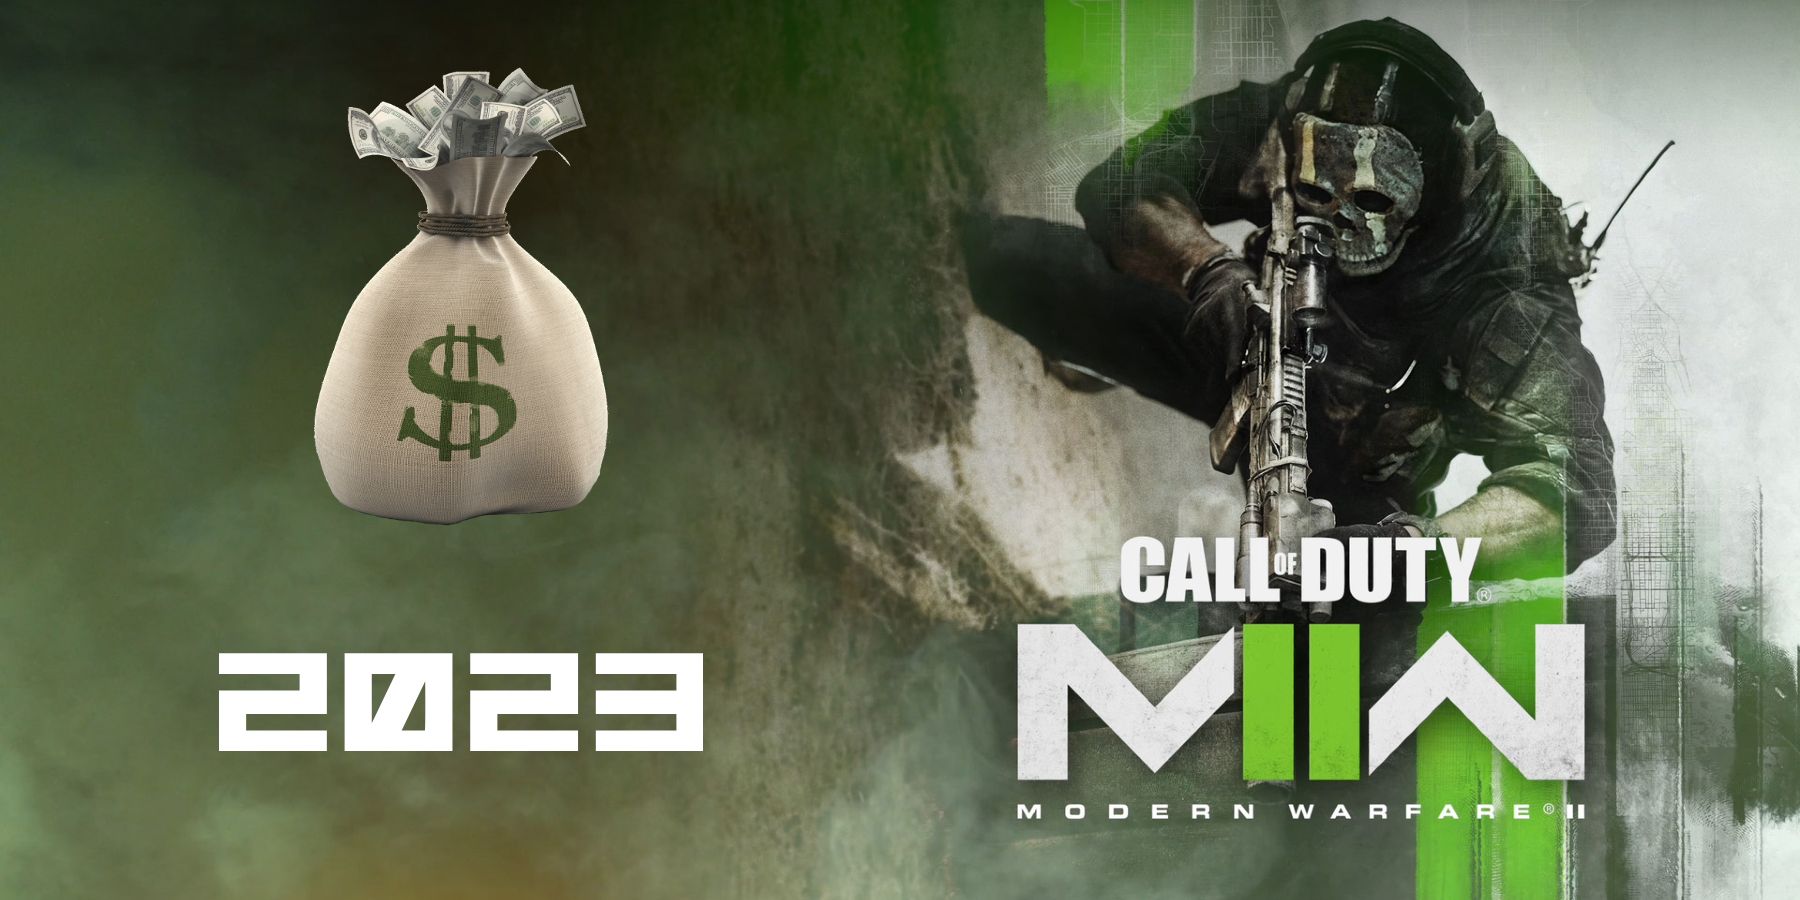 Call of Duty Modern Warfare II Coming To Steam, Priced At $70